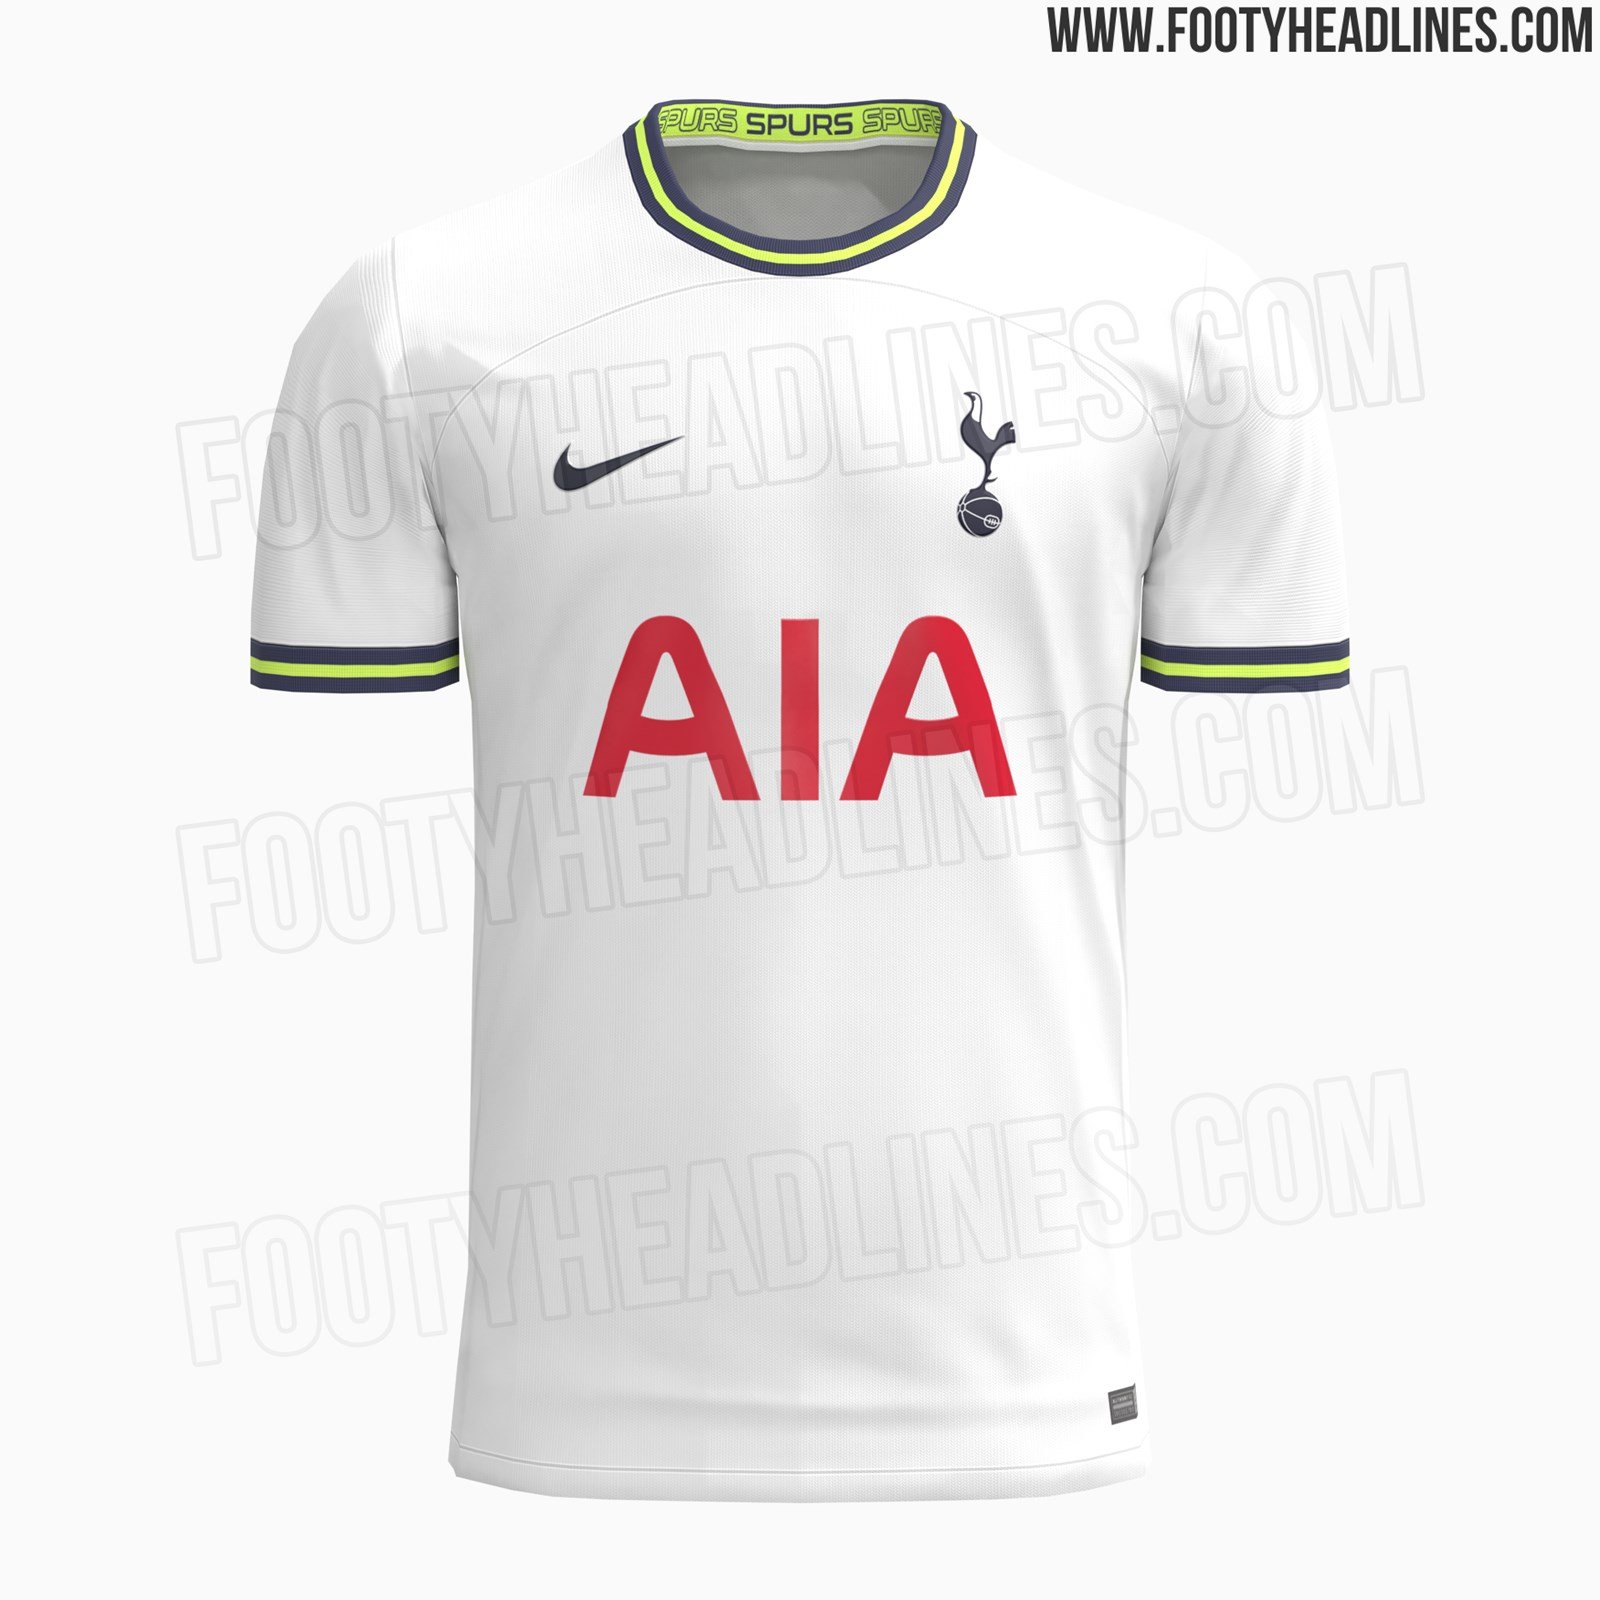 Tottenham release new home shirts for 2022-23 - Cartilage Free Captain